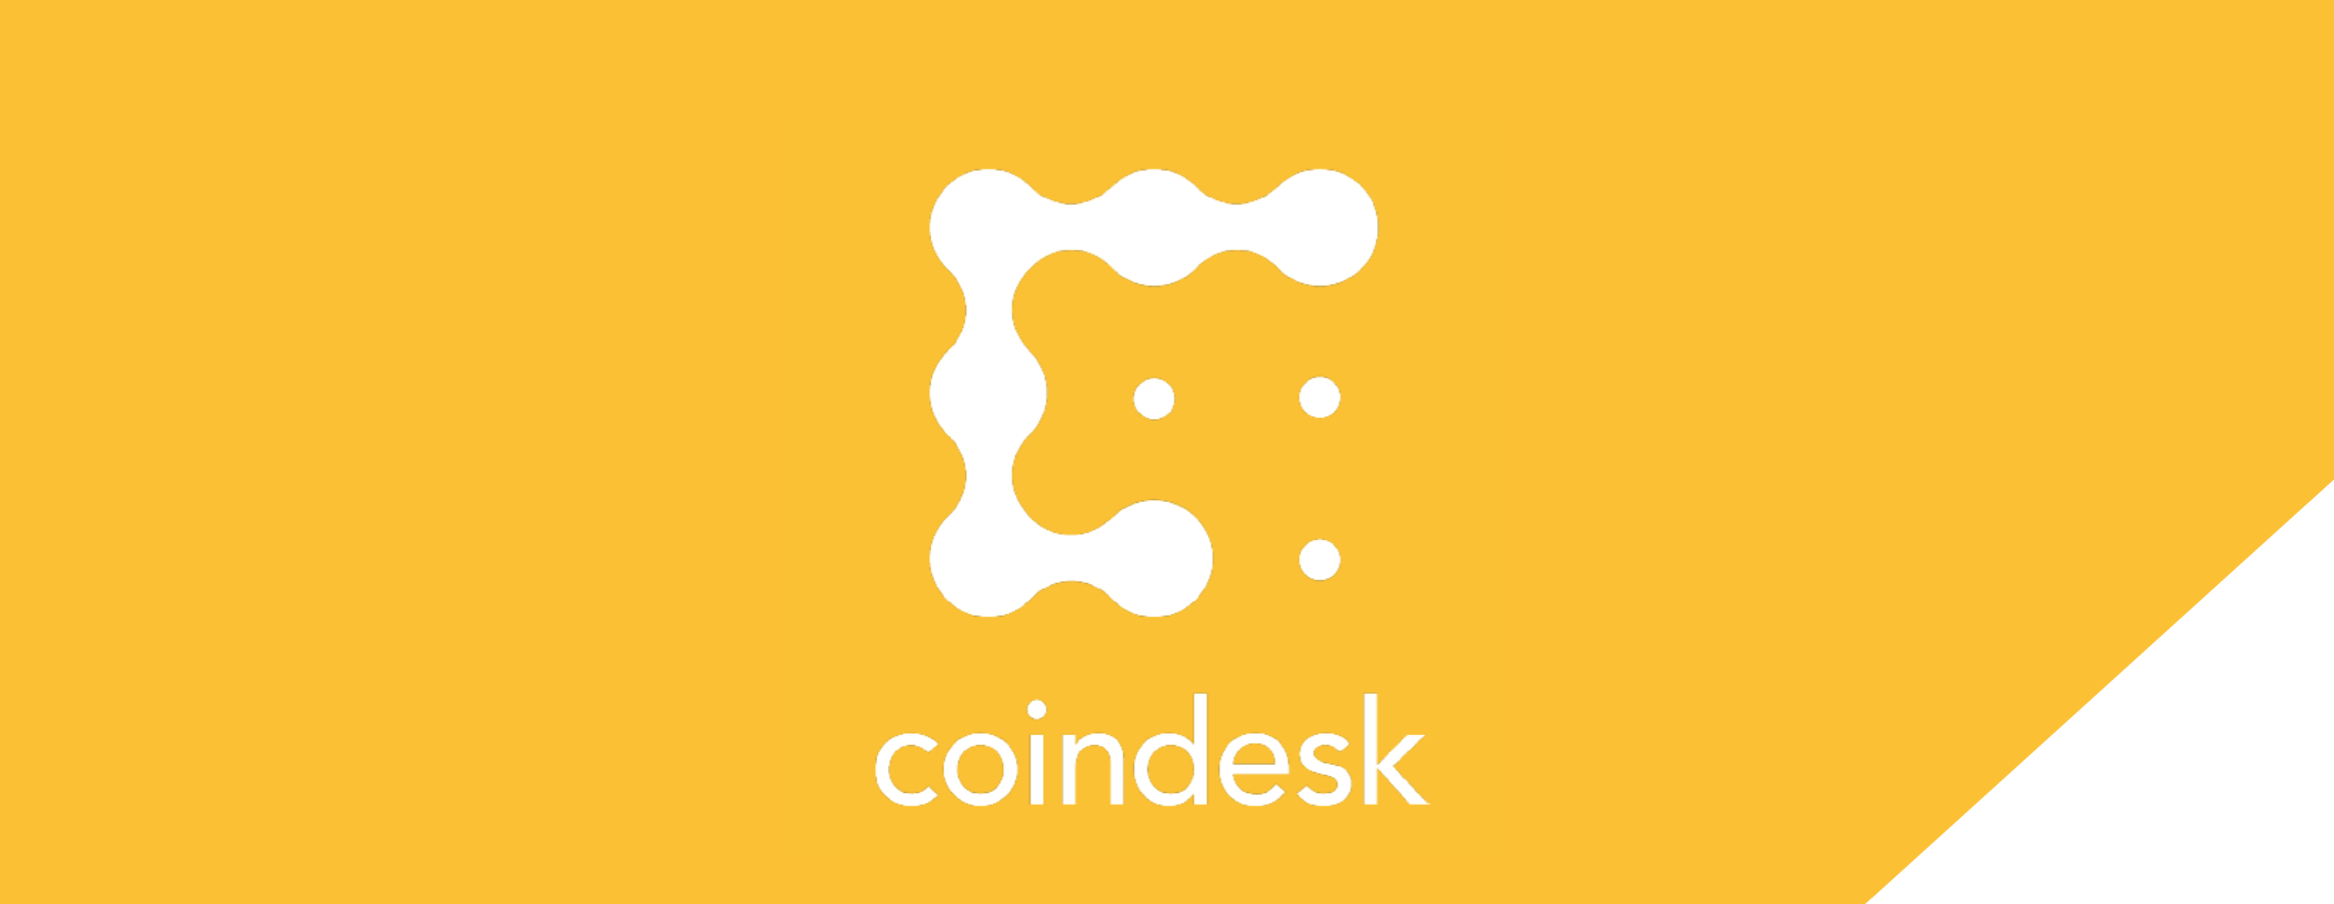 Introducing The New CoinDesk.com